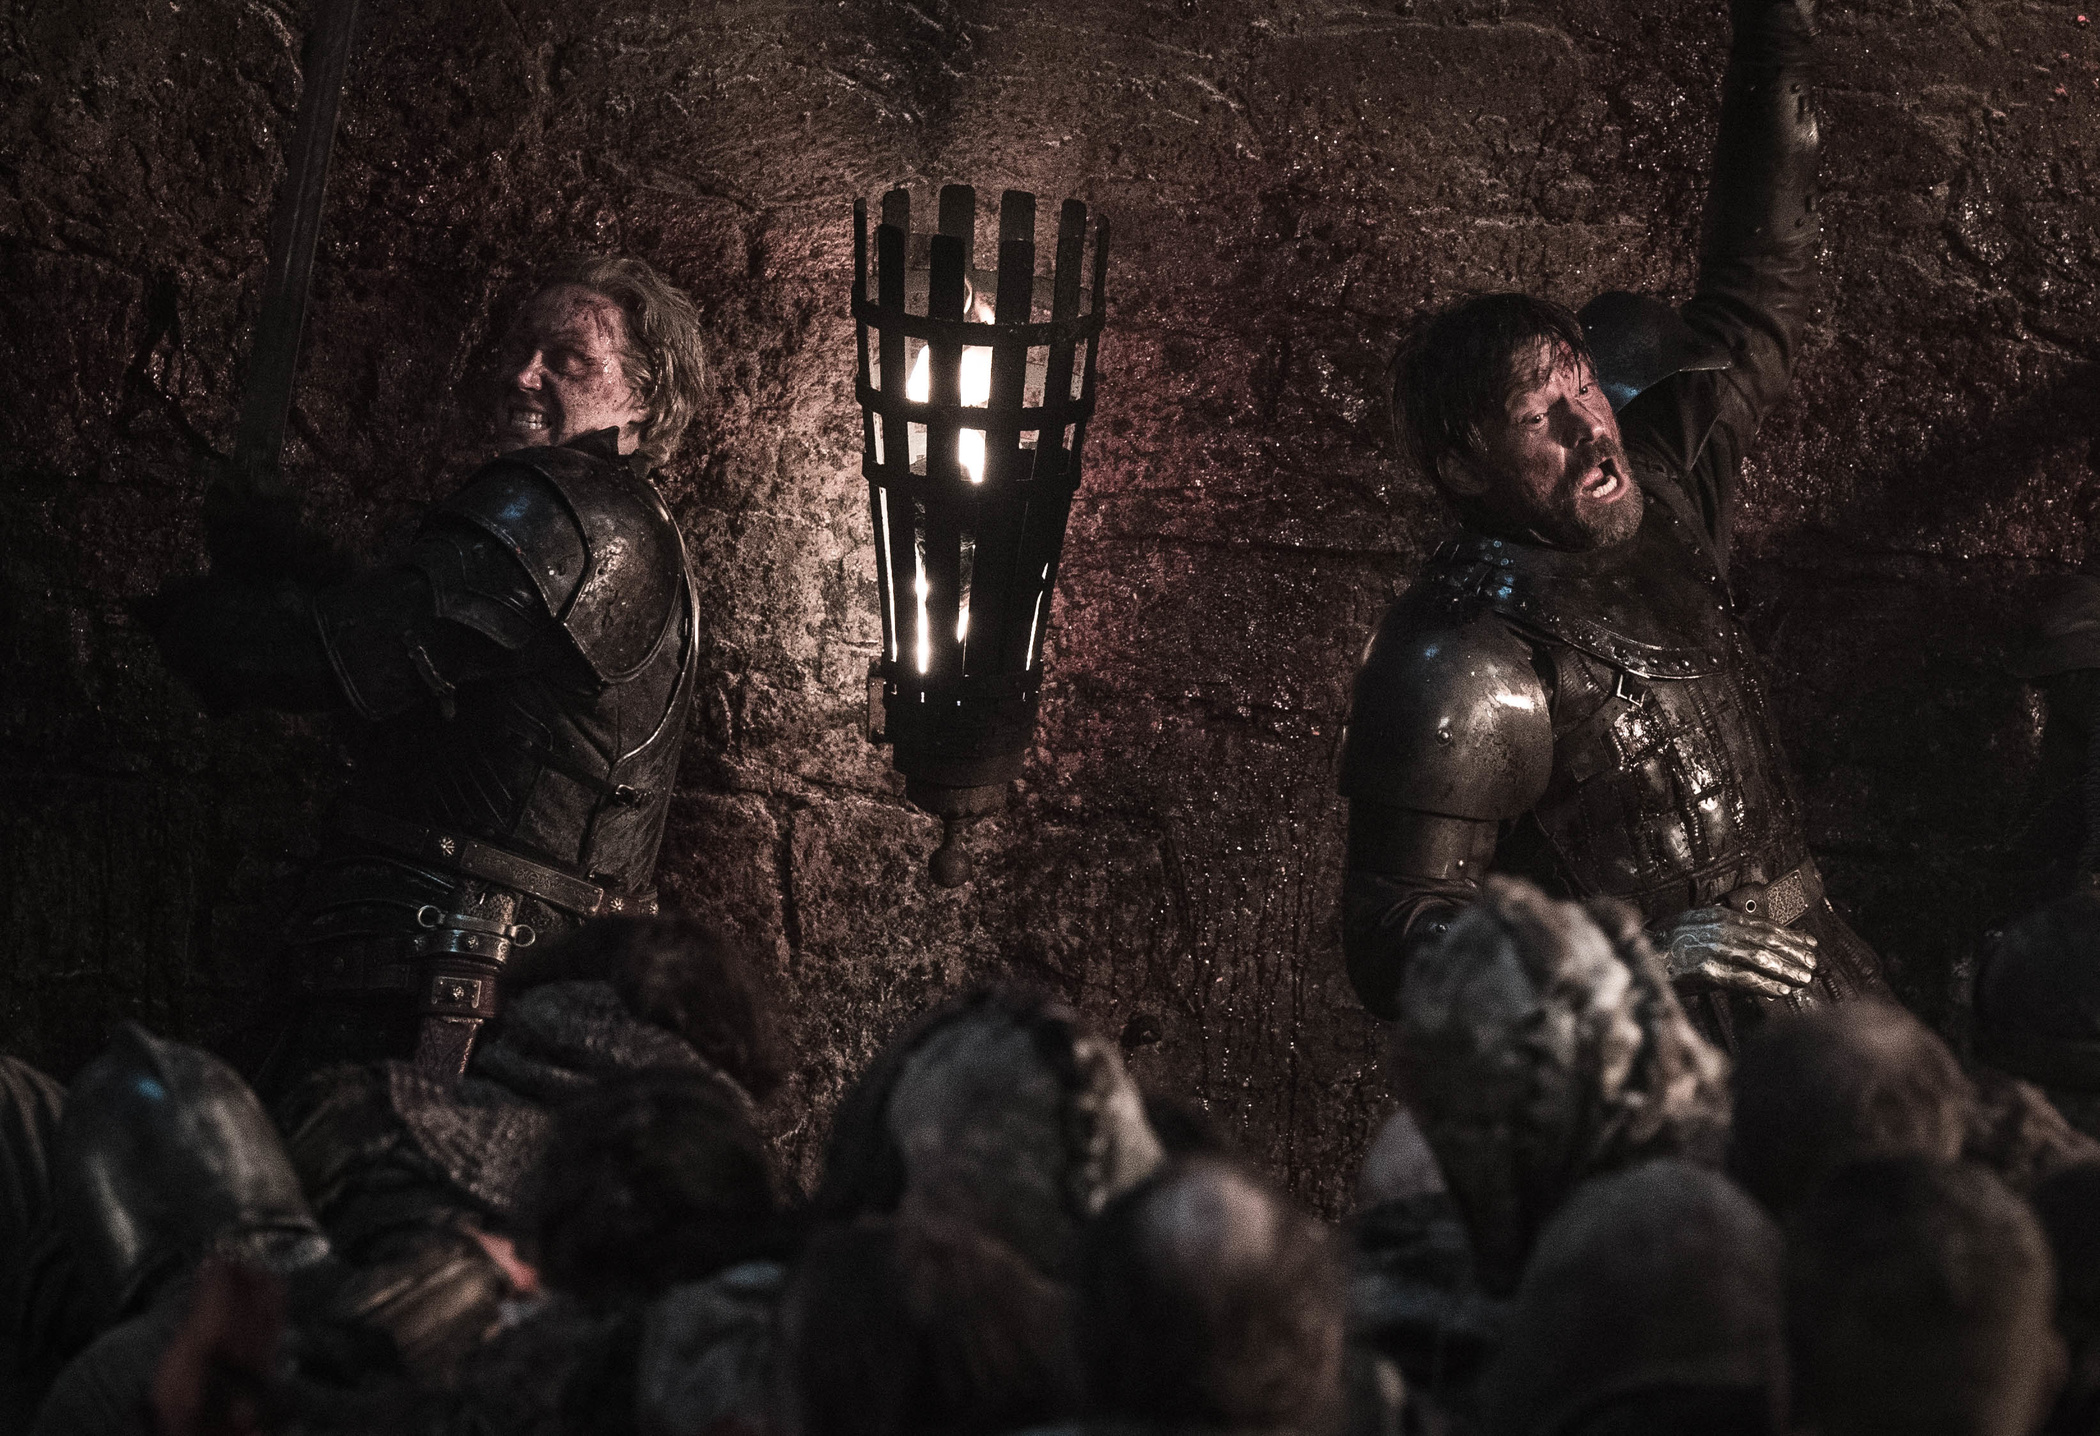 Ser Brienne of Tarth (Gwendoline Christie) and Ser Jaime Lannister (Nikolaj Coster-Waldau) battle wights in Winterfell castle on Game of Thrones episode "The Long Night"